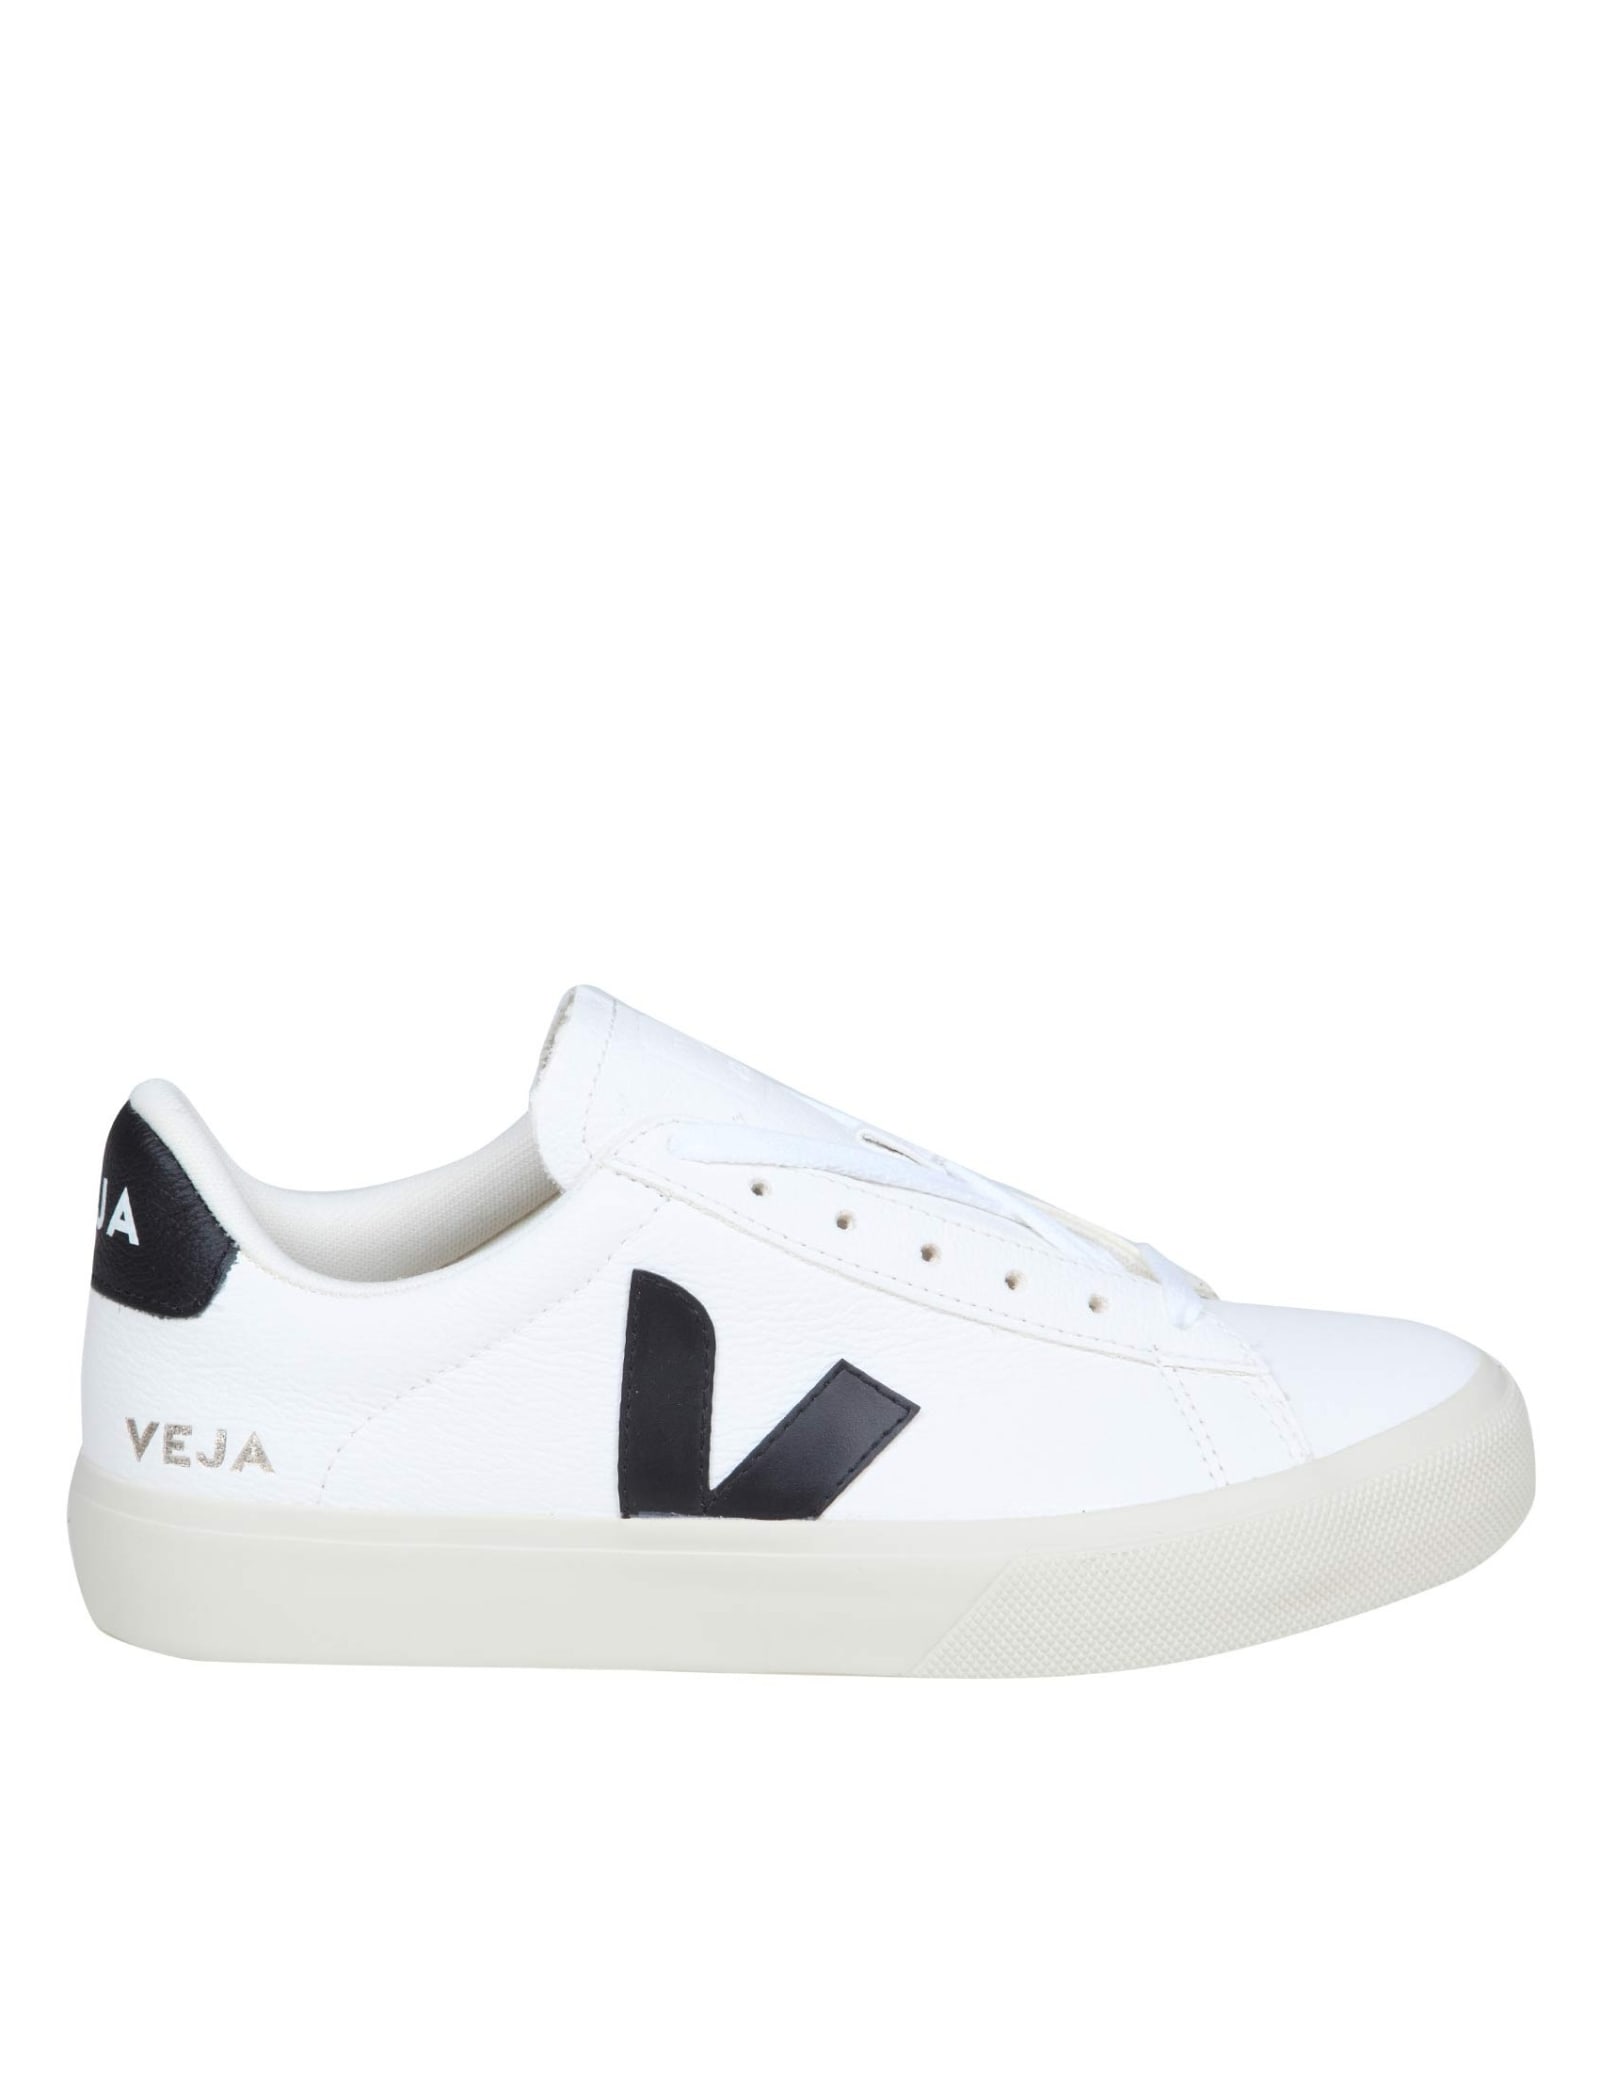 VEJA CAMPO SNEAKERS IN BLACK AND WHITE LEATHER